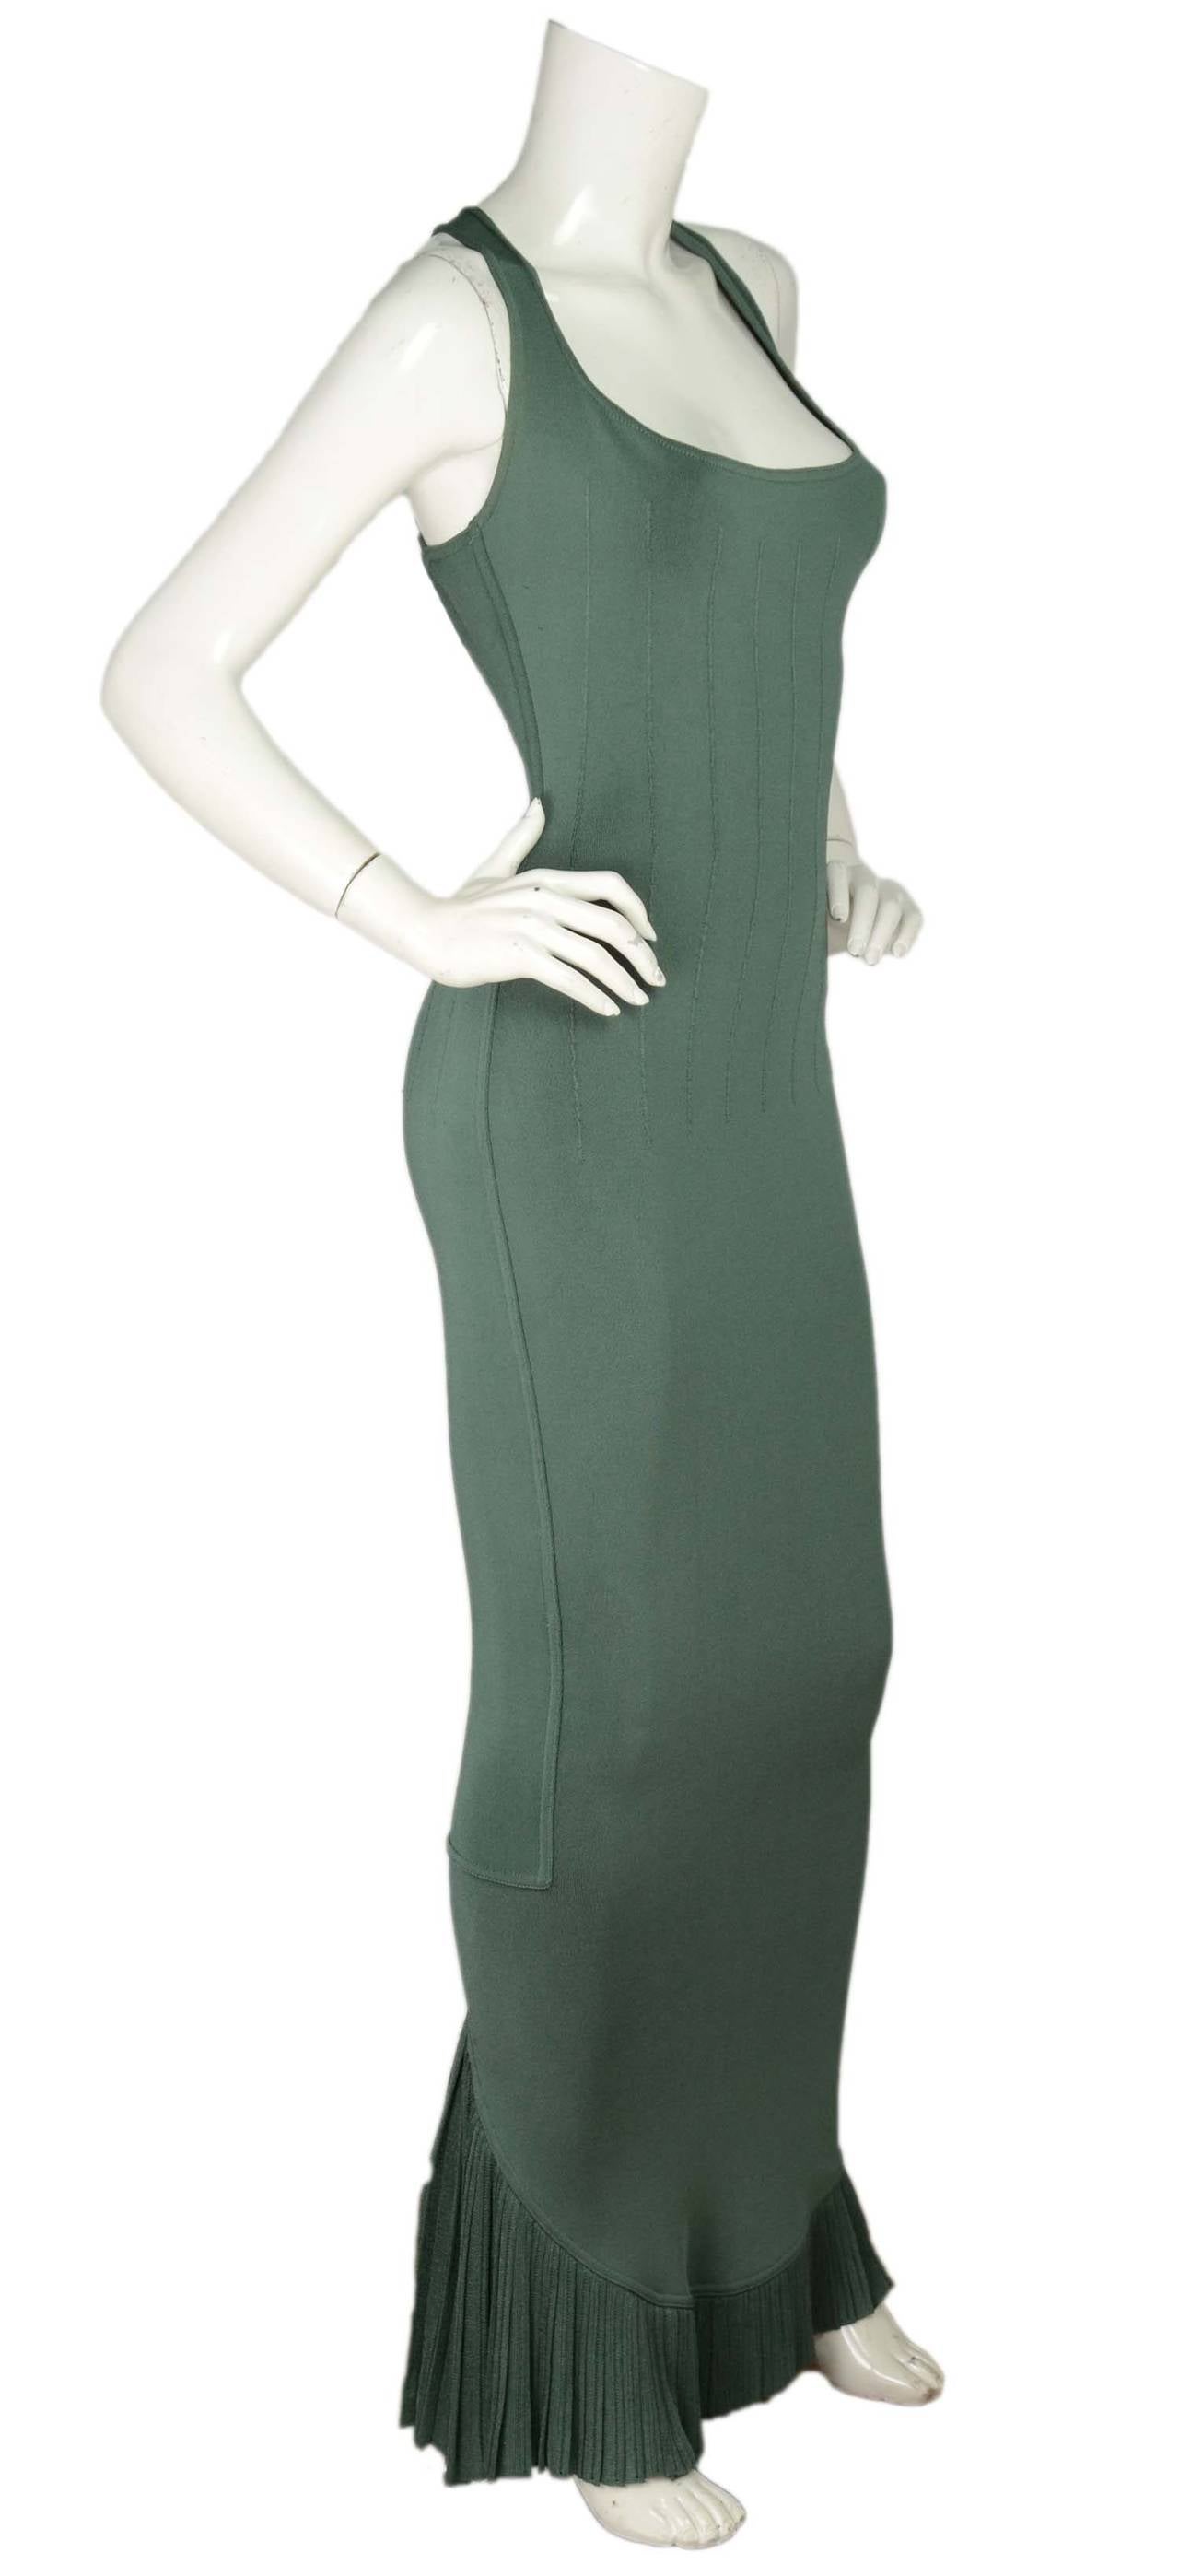 Alaia Green Sleeveless Gown w/Ruffle Detailing at HemlineFeatures vertical stitching detailing through bust and waist

    Made in: Italy
    Color: Green
    Composition:  85% rayon, 15% spandex
    Lining: None
    Closure/opening: Pull